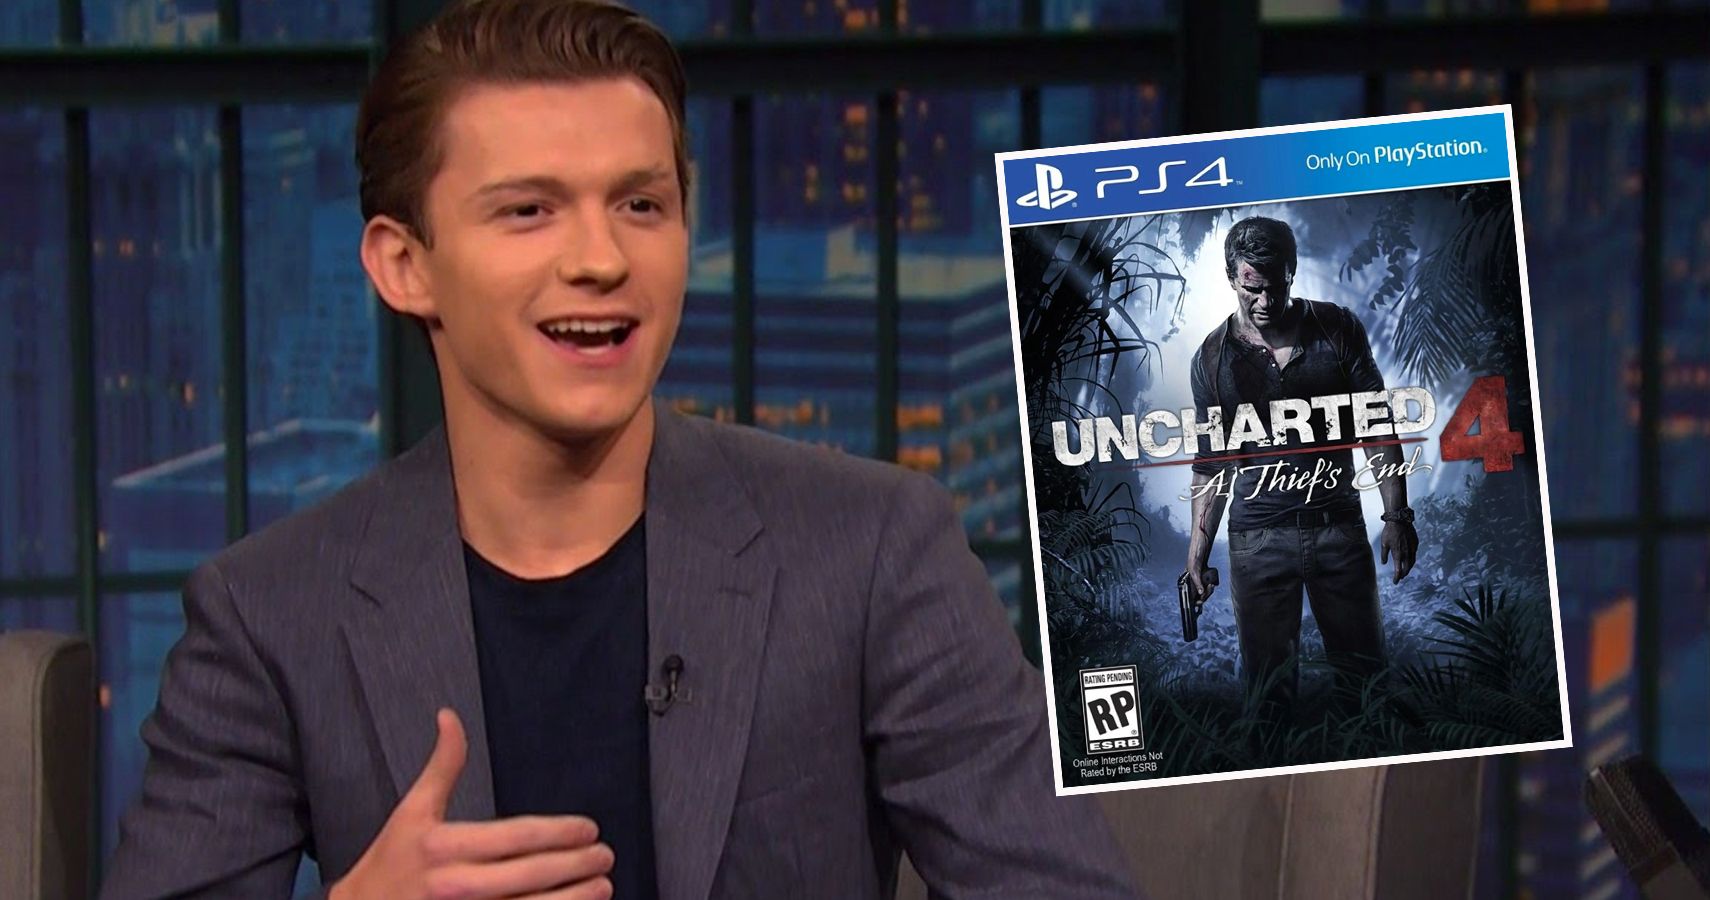 Tom Holland Reveals Uncharted Movie Will Be Inspired By A Thiefs End